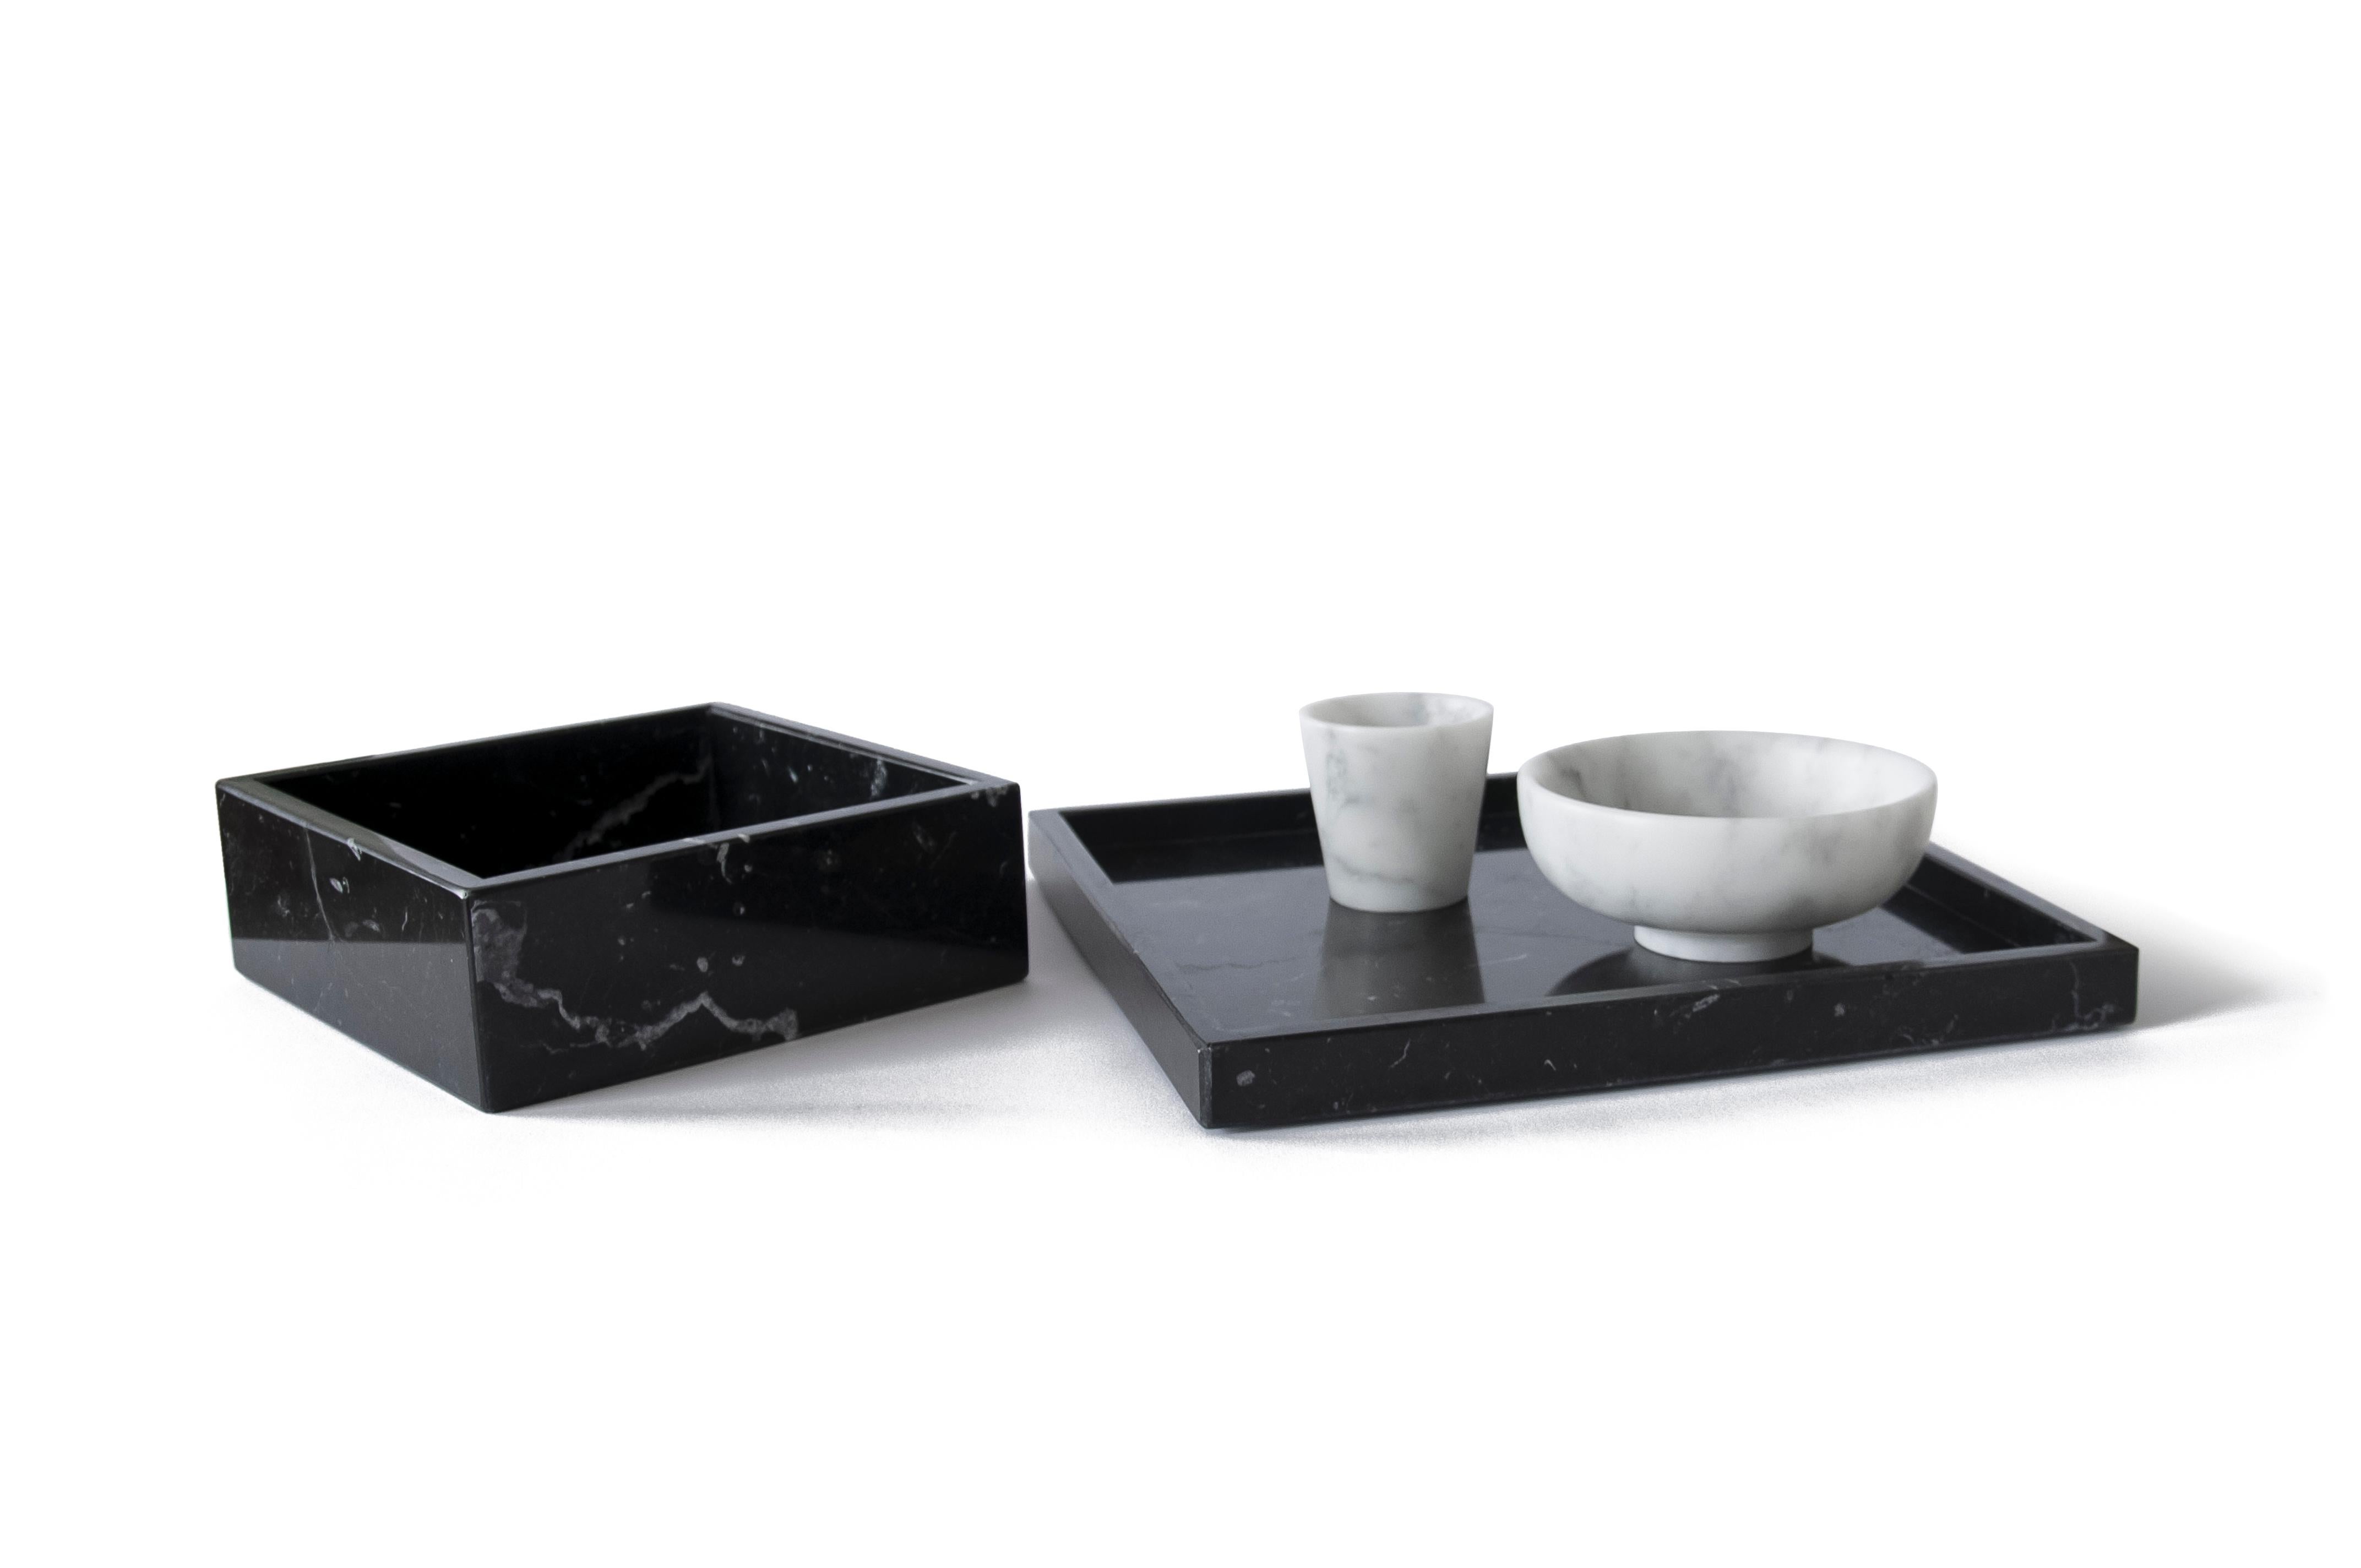 Set composed by one spa tray (26,5x26,5x2cm) and one towel tray (17,5x17x6cm) in black Marquina marble, one small bowl (12,5x5cm) and one small glass (6x6cm) in white Carrara satin marble.

Product weight (excluding shipping): gr 2200 (spa tray), gr